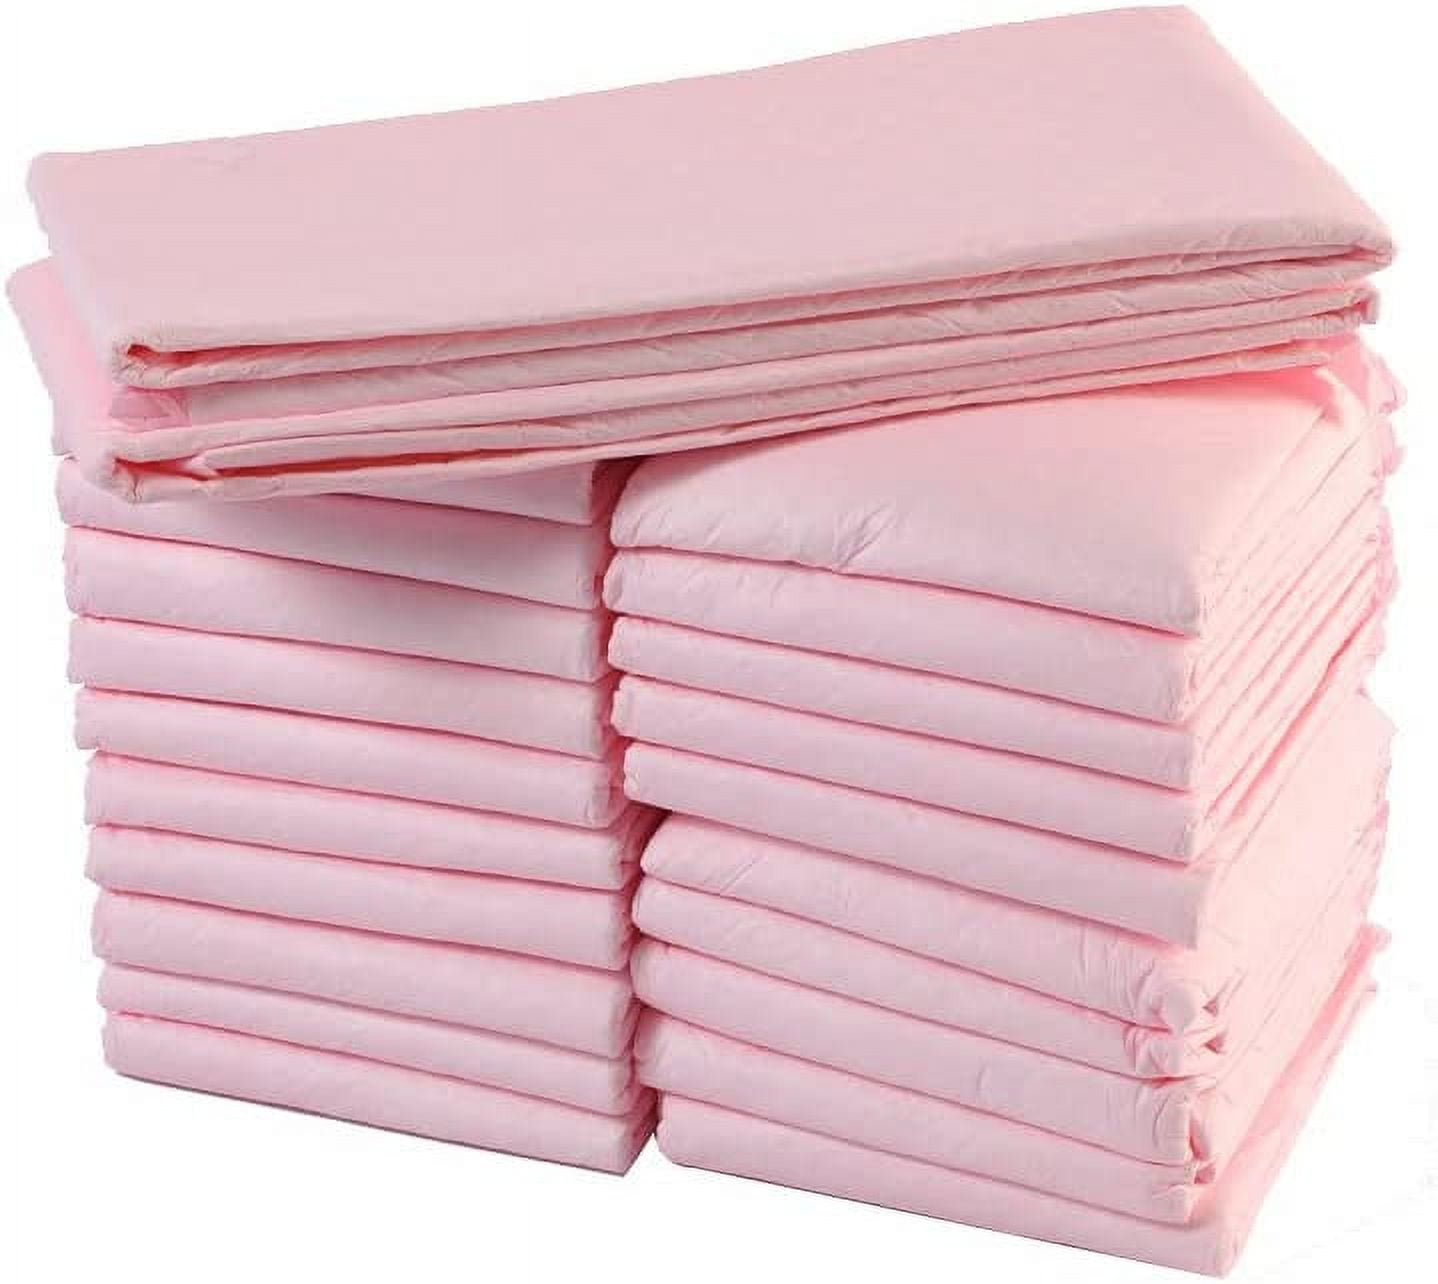 Hand-E Incontinence Disposable Underpads - Pink